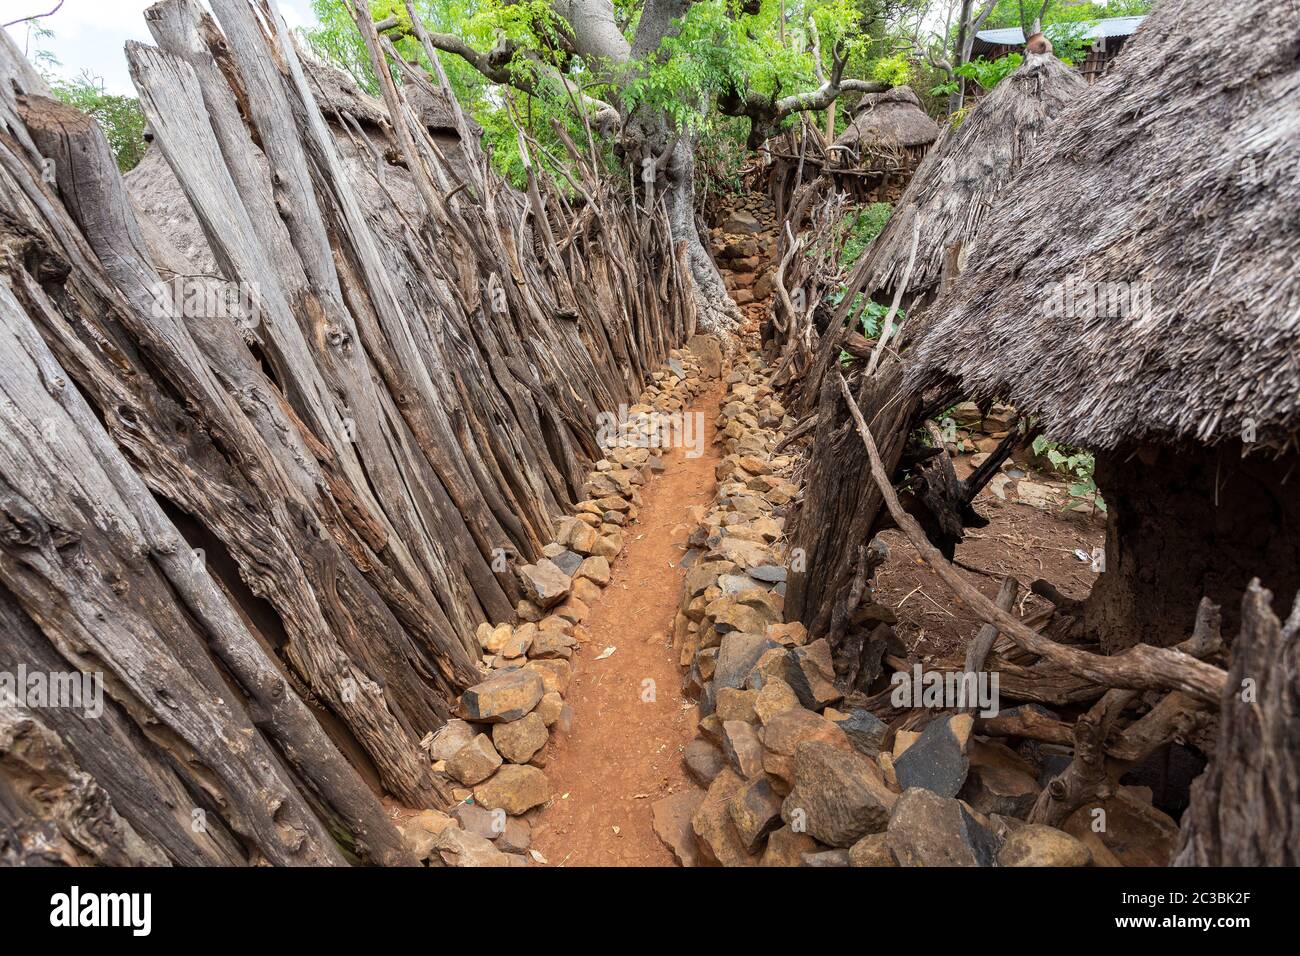 Narrow pathway in Konso, walled village tribes Konso. Africa, Ethiopia. Konso villages are listed as UNESCO World Heritage sites. Stock Photo